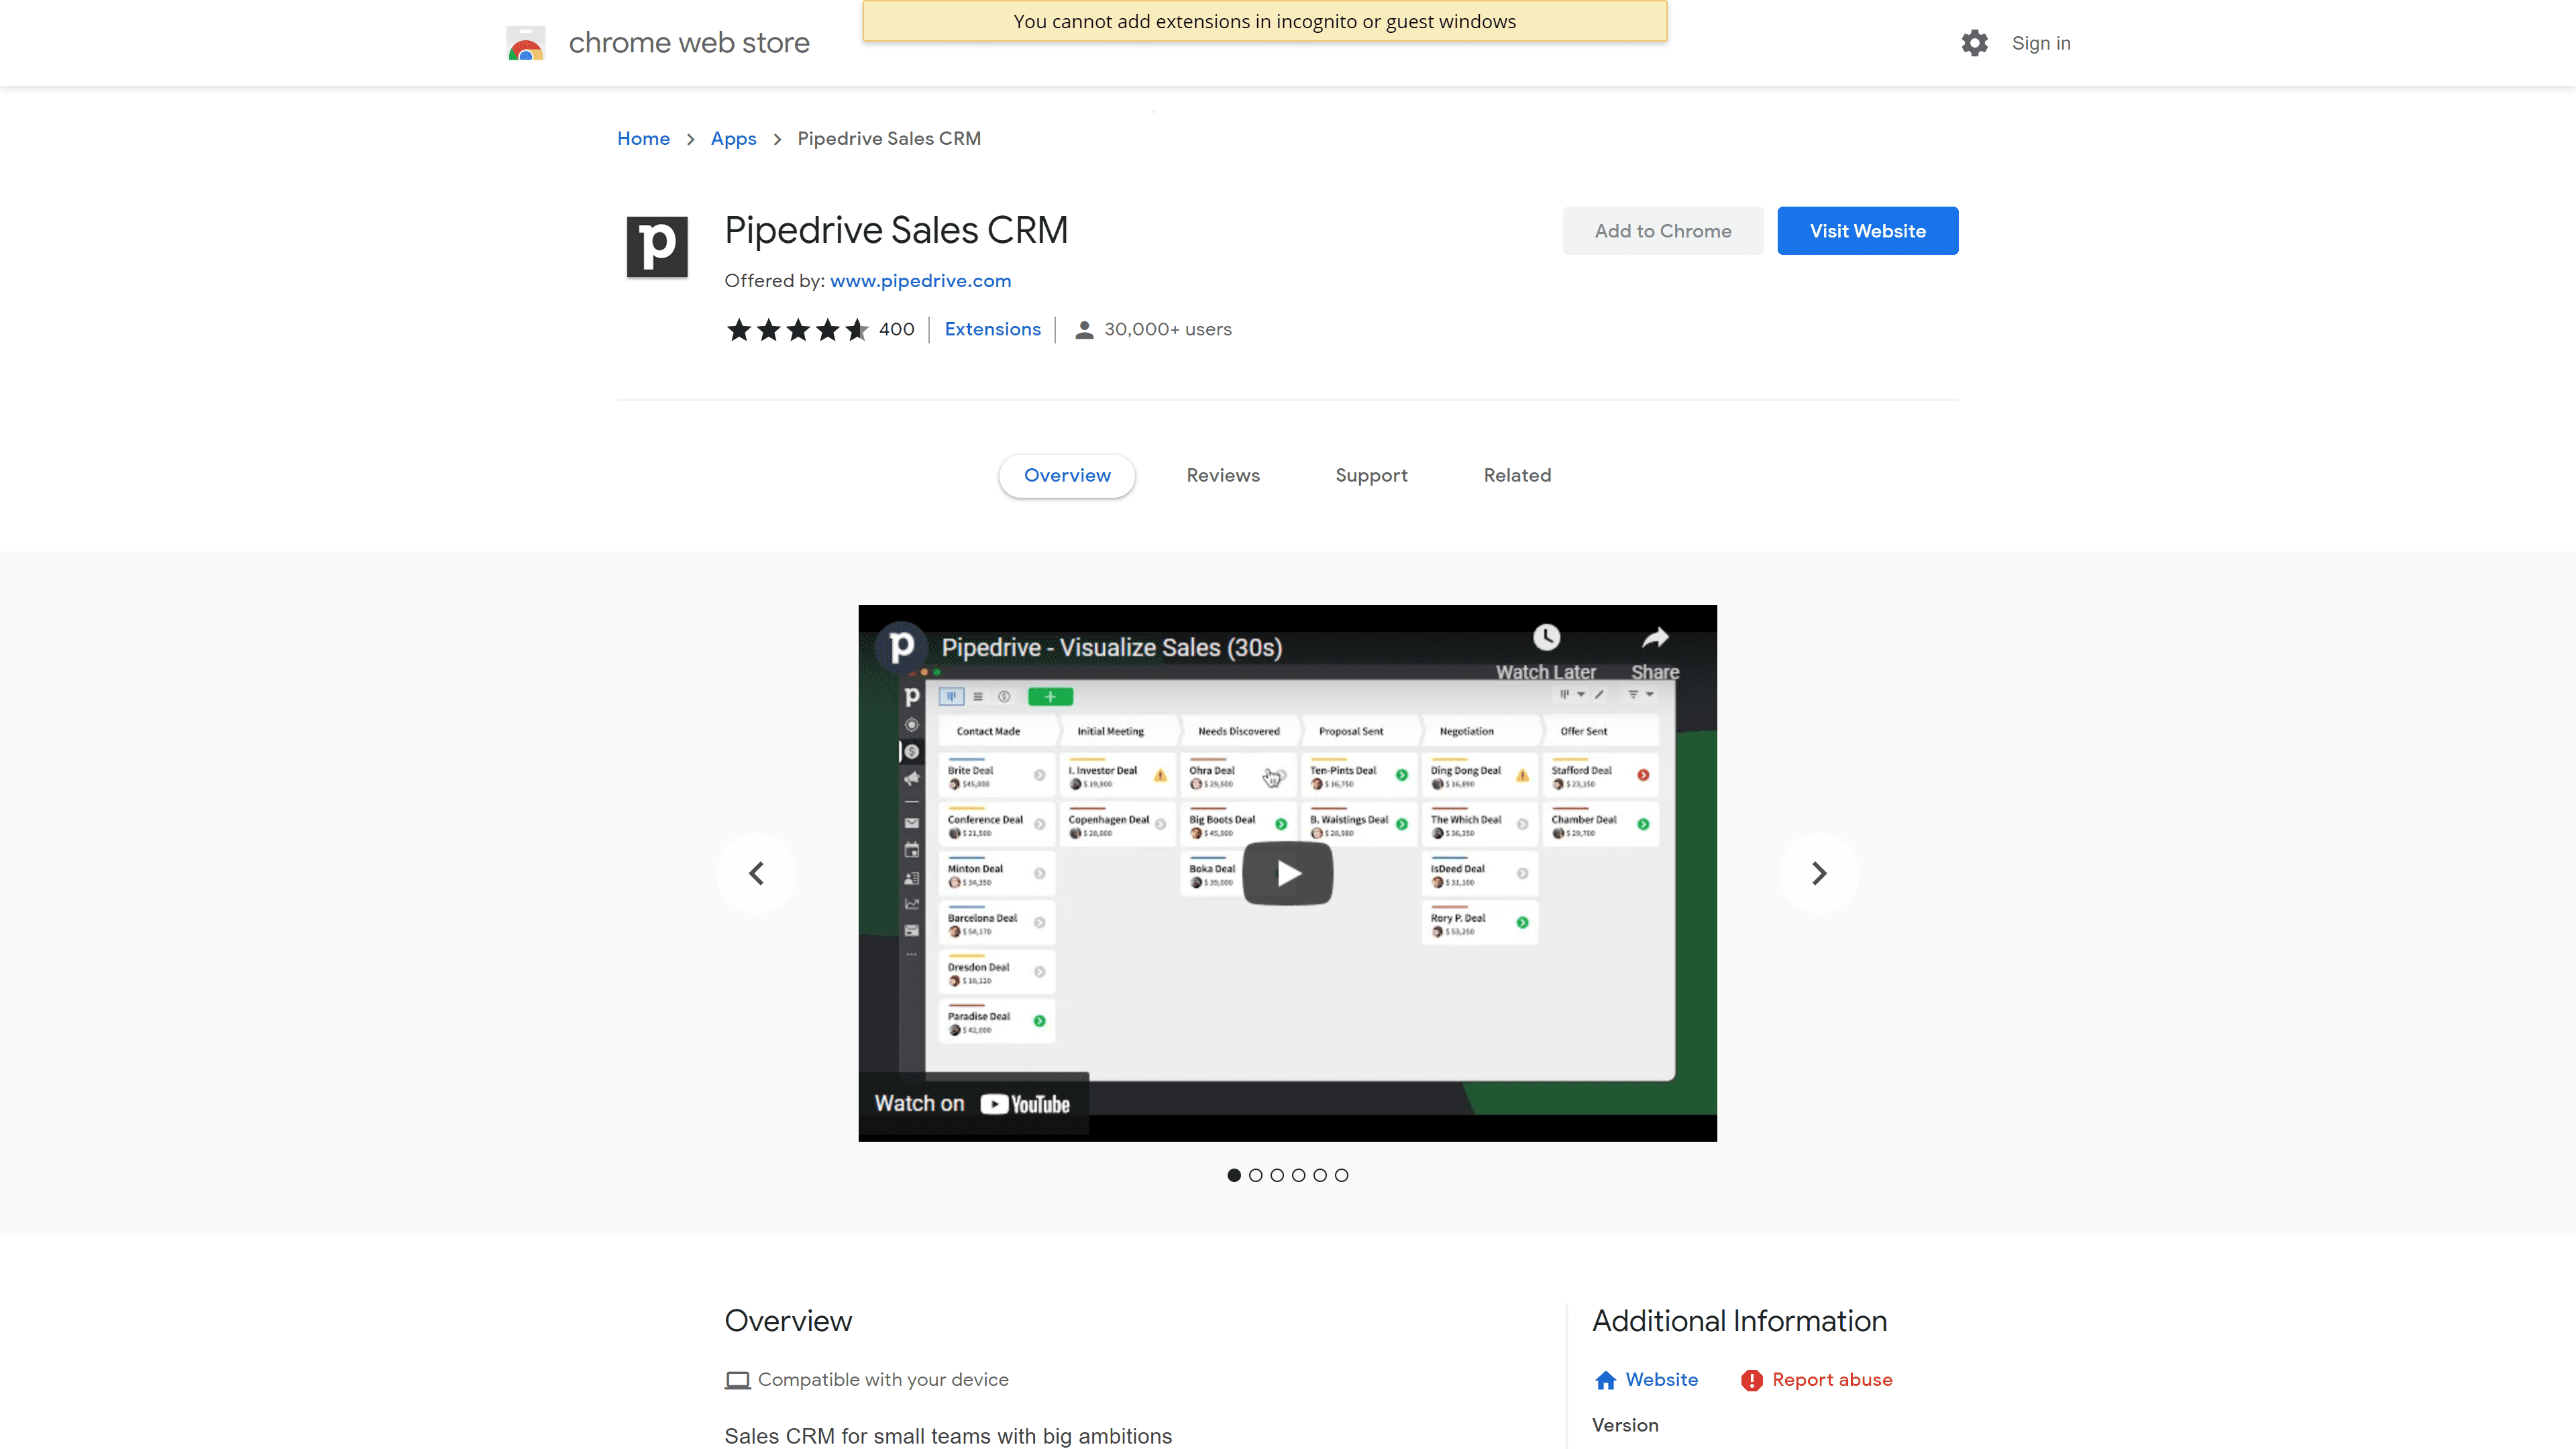 Pipedrive Sales CRM